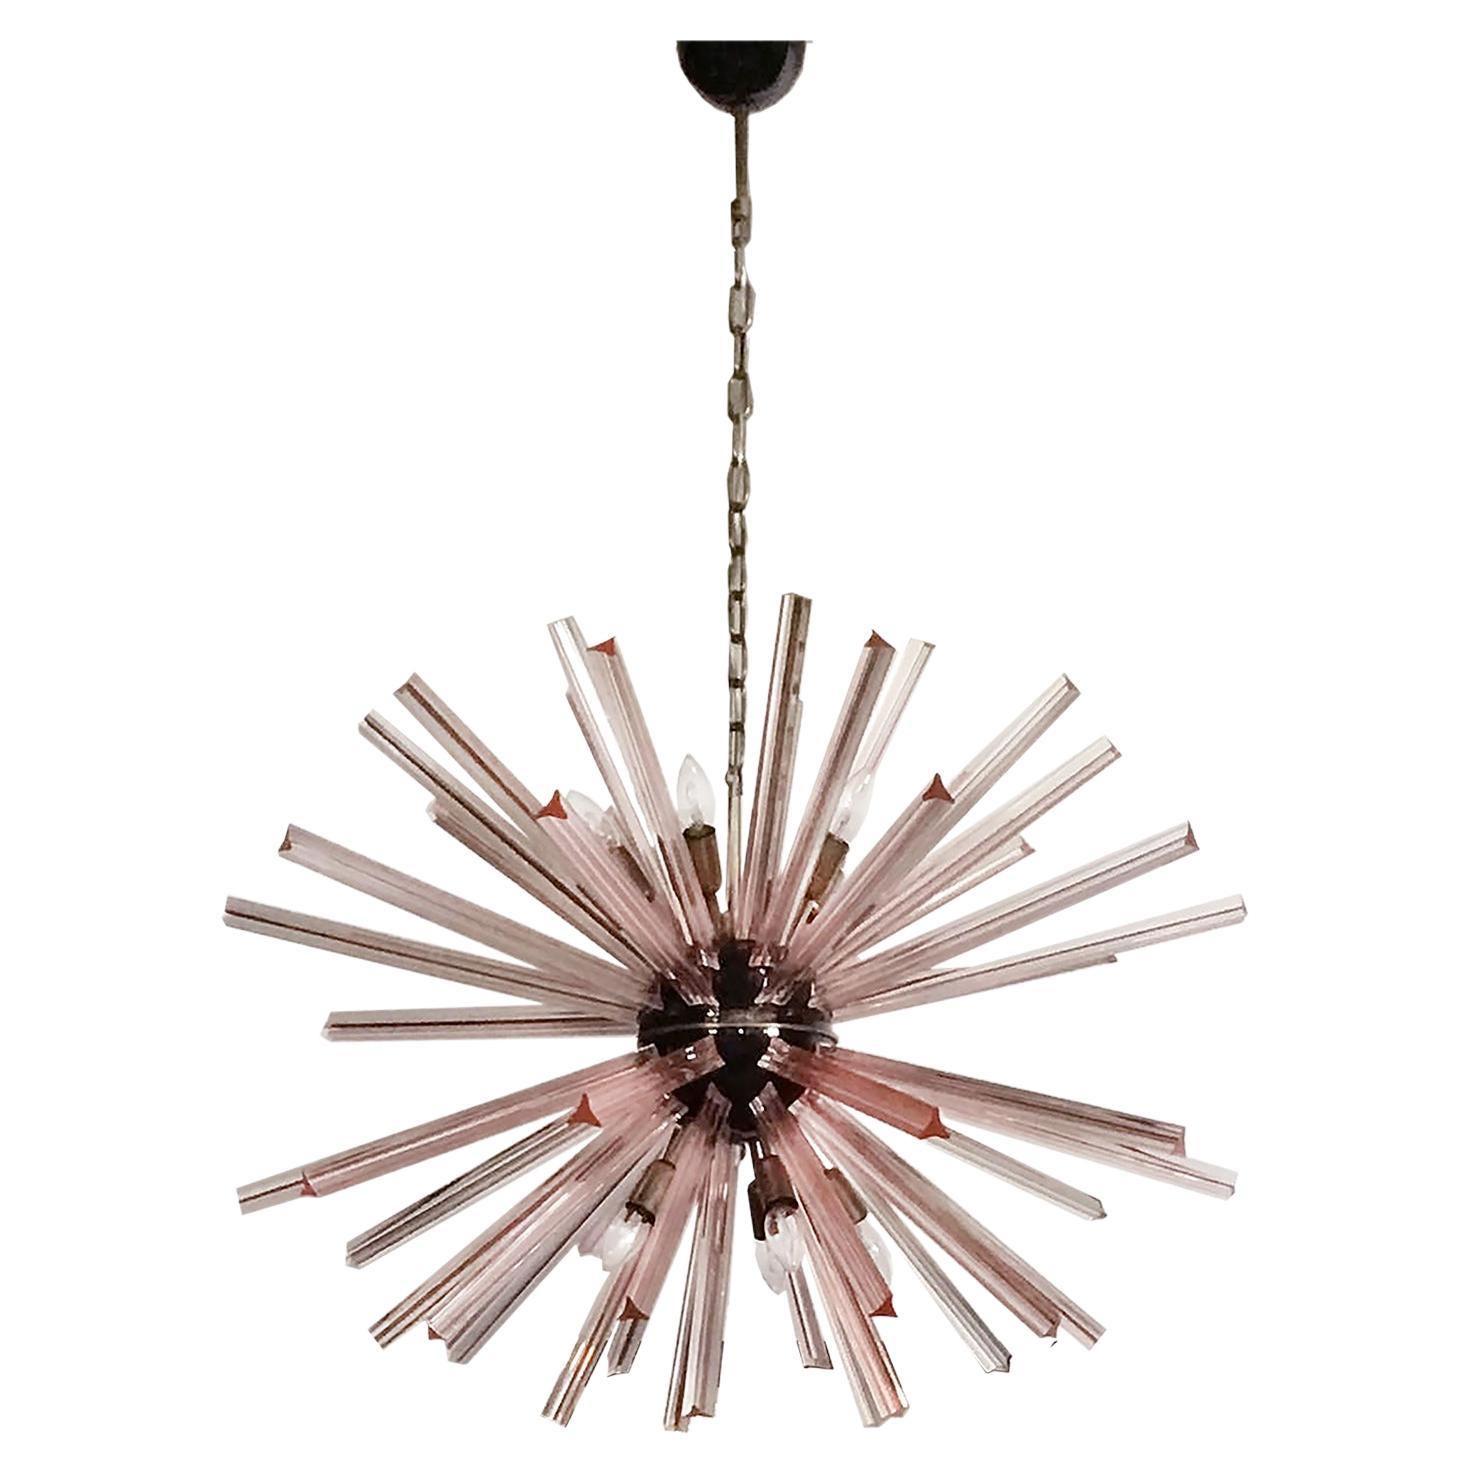 Pair Sputnik chandeliers surrounding 50 pink glass 'triedri' prisms radiating from a center black metal nucleus. Brass lamp holder. Period: late XX century
Dimensions: 51,20 inches (130 cm) height with chain; 27,55 inches (70 cm) height without